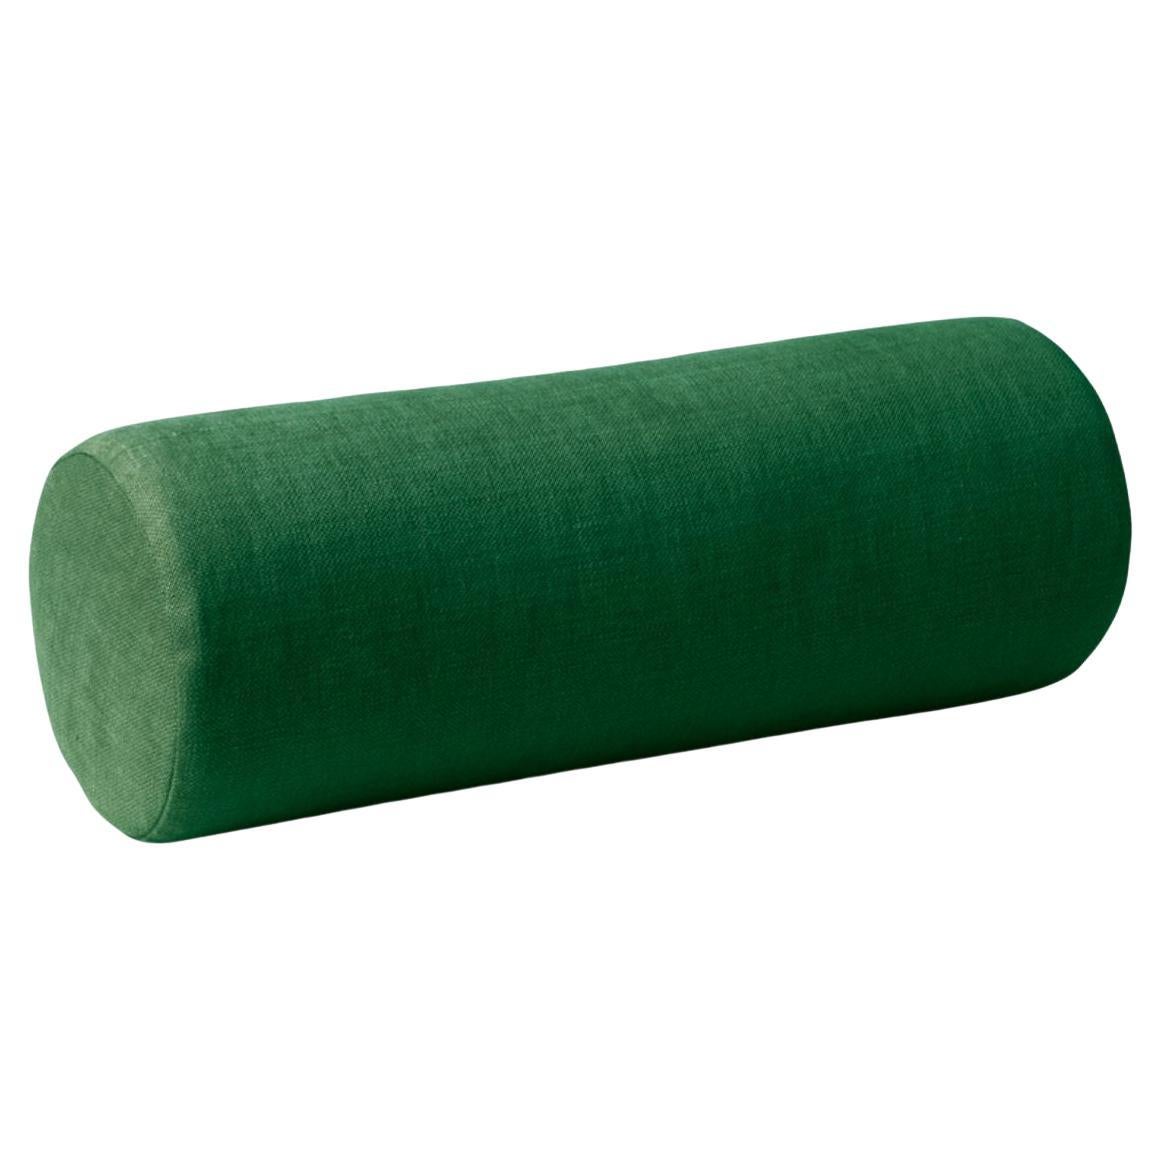 Galore Cushion Emerald by Warm Nordic